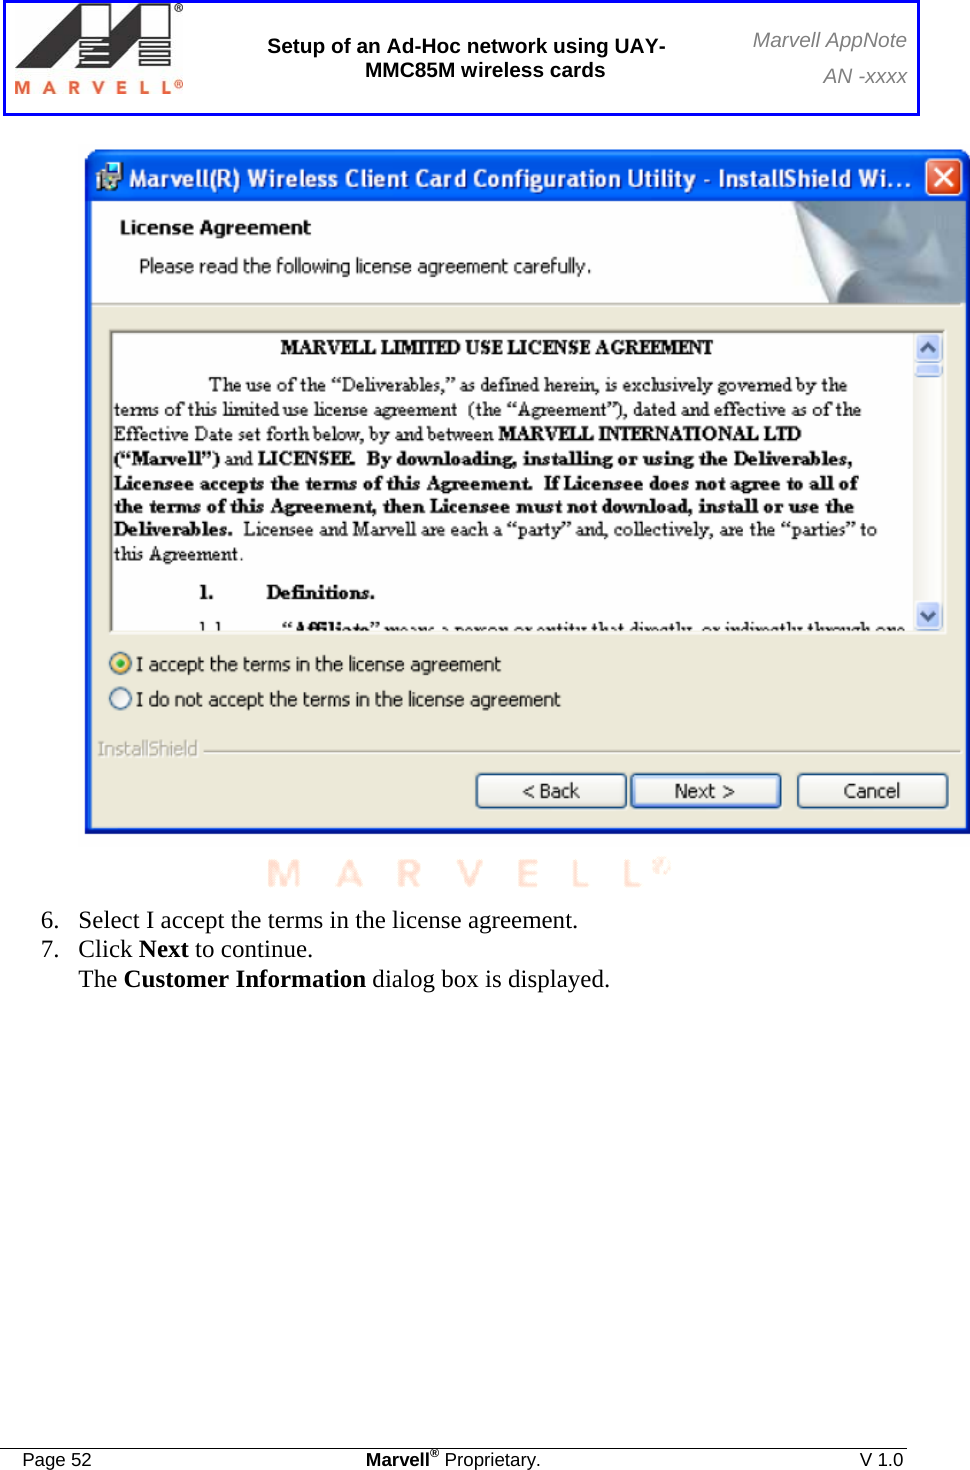  Setup of an Ad-Hoc network using UAY-MMC85M wireless cards Marvell AppNoteAN -xxxx  Page 52  Marvell® Proprietary.  V 1.0    6. Select I accept the terms in the license agreement. 7. Click Next to continue. The Customer Information dialog box is displayed.   